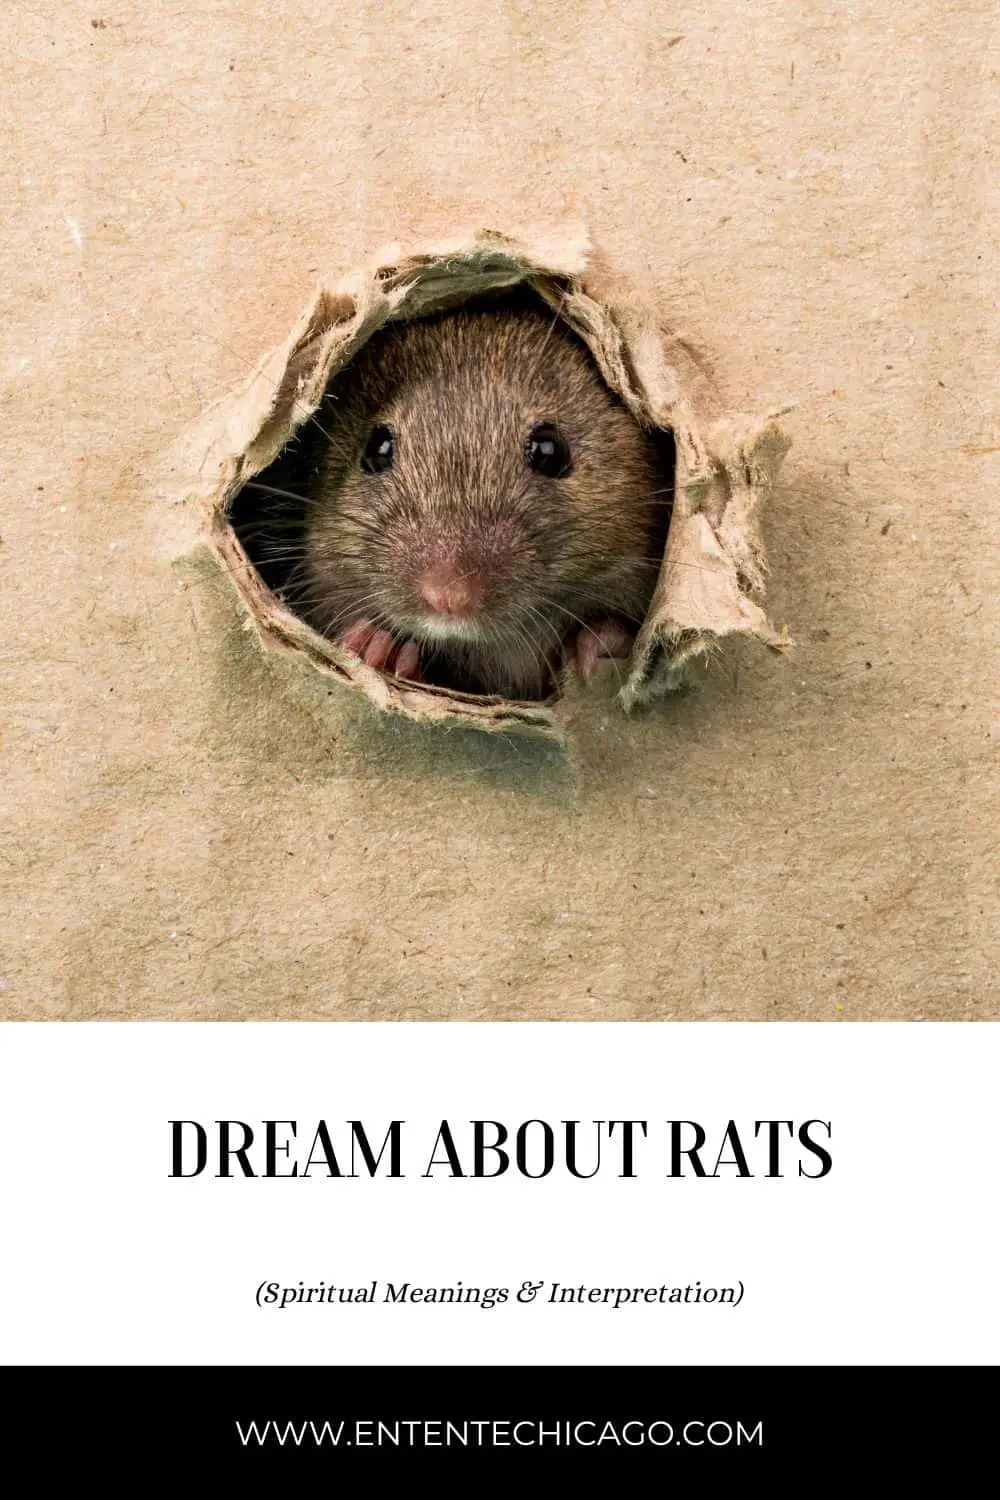 What Could Be The Spiritual Significance Of Seeing A Rat In Your House?